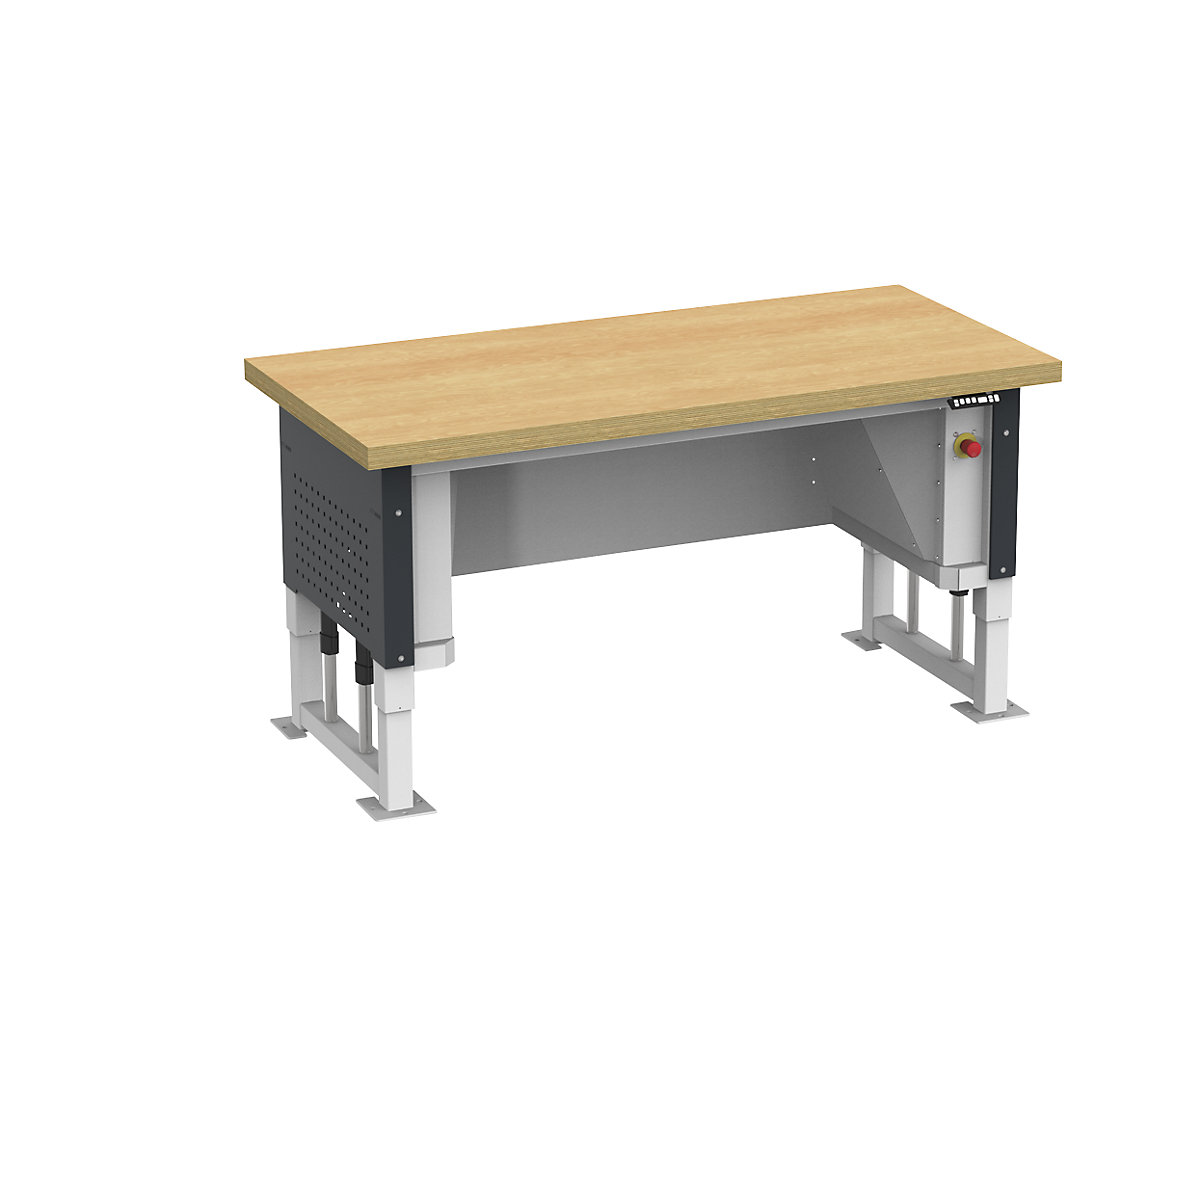 Heavy duty table, electrically height adjustable, worktop width 1685 mm, max. surface load 1000 kg, charcoal RAL 7016-2